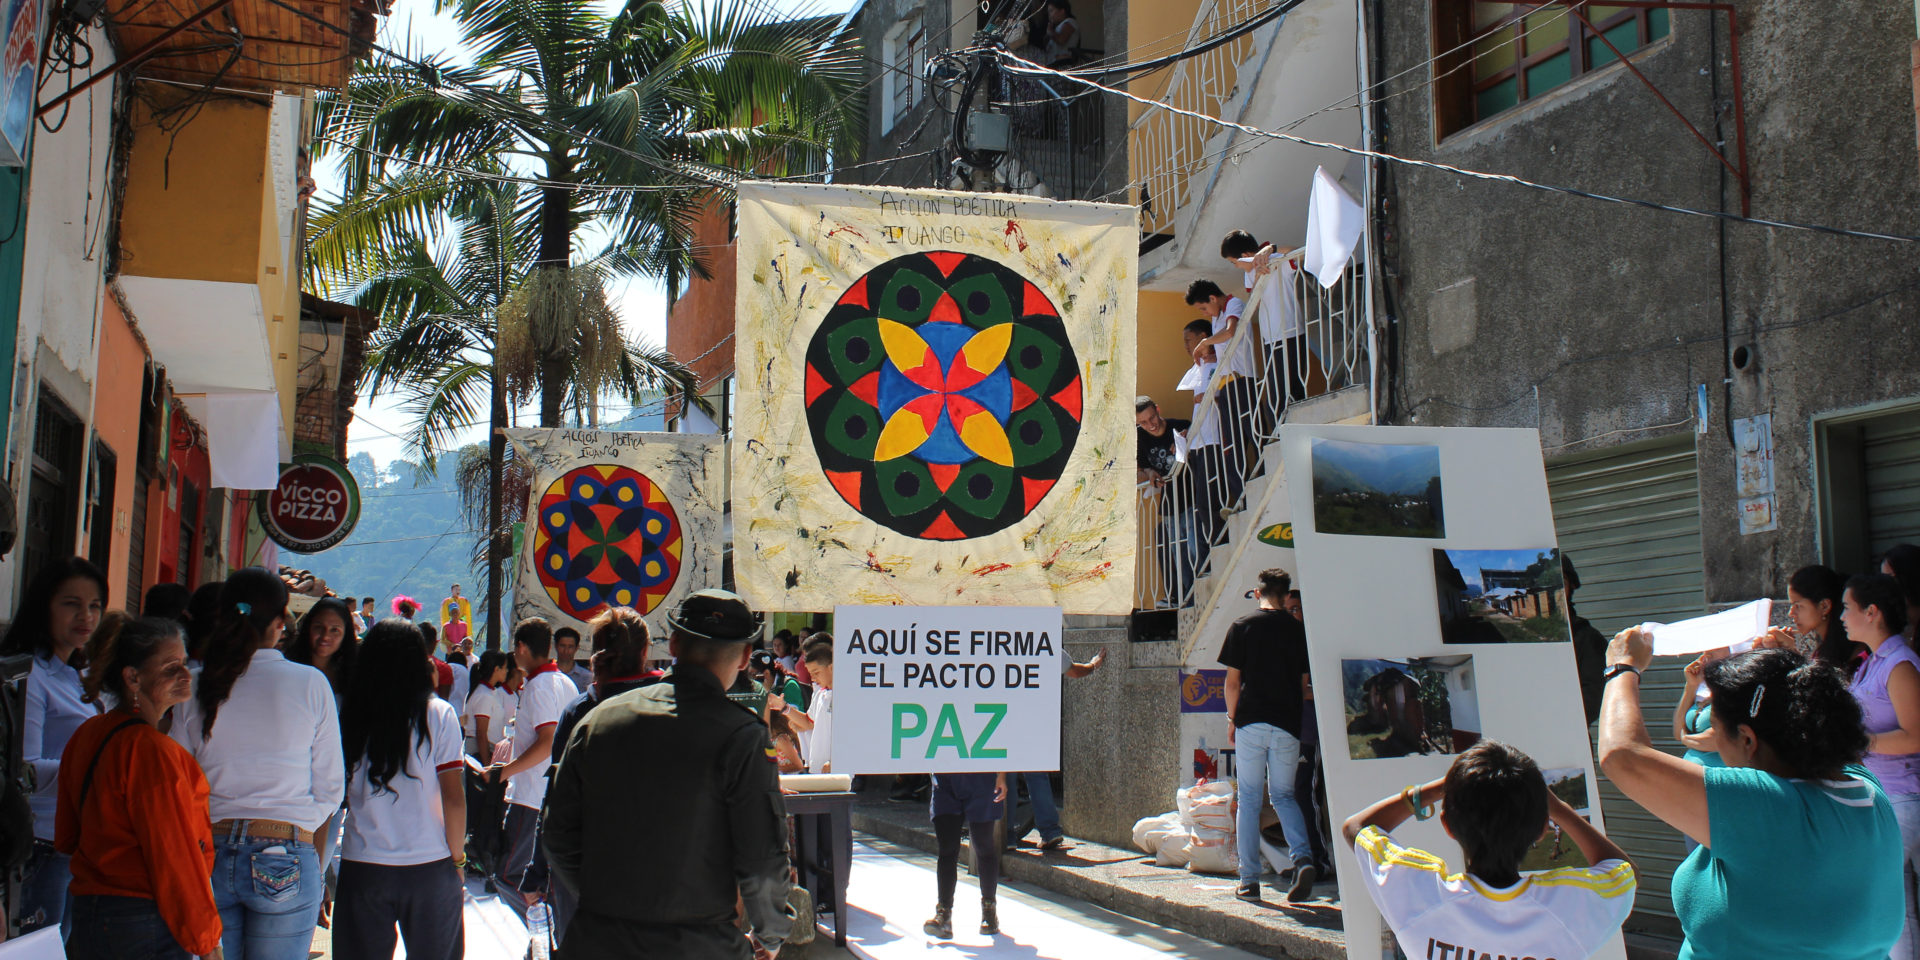 A street fair with several colorful banners decorating the road. The closest banner reads 